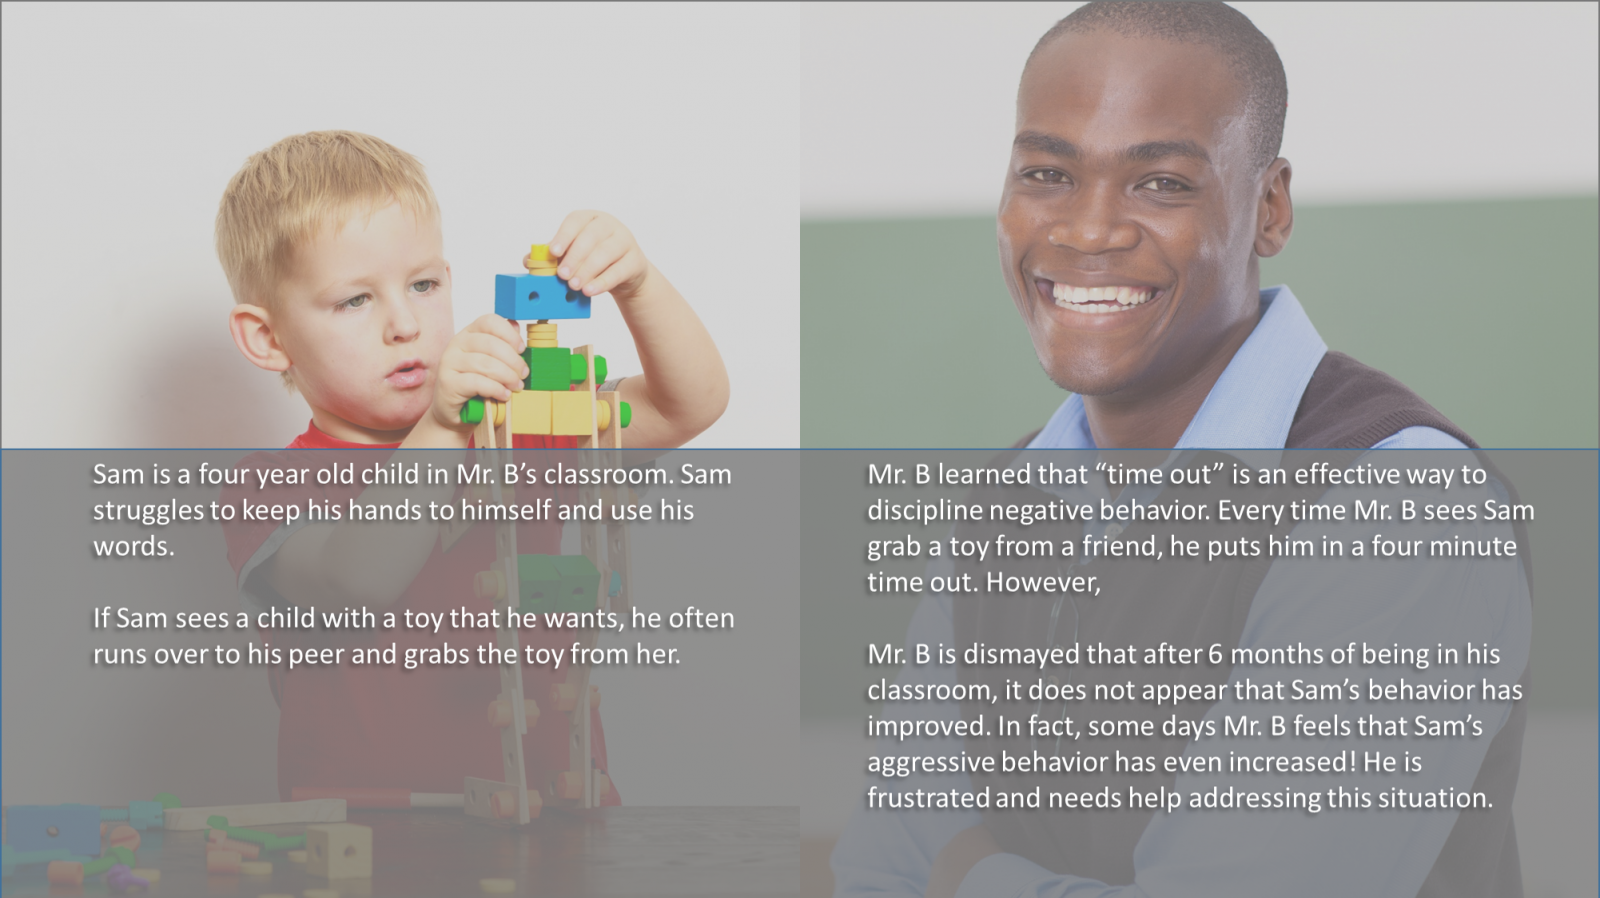 What A split image of a young boy building a robot out of blocks and a smiling teacher with text underneath "Sam is a four year old child in Mr. B’s classroom. Sam struggles to keep his hands to himself and use his words. If Sam sees a child with a toy that he wants, he often runs over to his peer and grabs the toy from her. Mr. B learned that “time out” is an effective way to discipline negative behavior. Every time Mr. B sees Sam grab a toy fro m a friend, he puts him in a four minute time out. However, Mr. B is dismayed that after 6 months of being in his classroom, it does not appear that Sam’s behavior has improved. In fact, some days Mr. B feels that Sam’s aggressive behavior has even increased! He is frustrated and needs help addressing this situation."